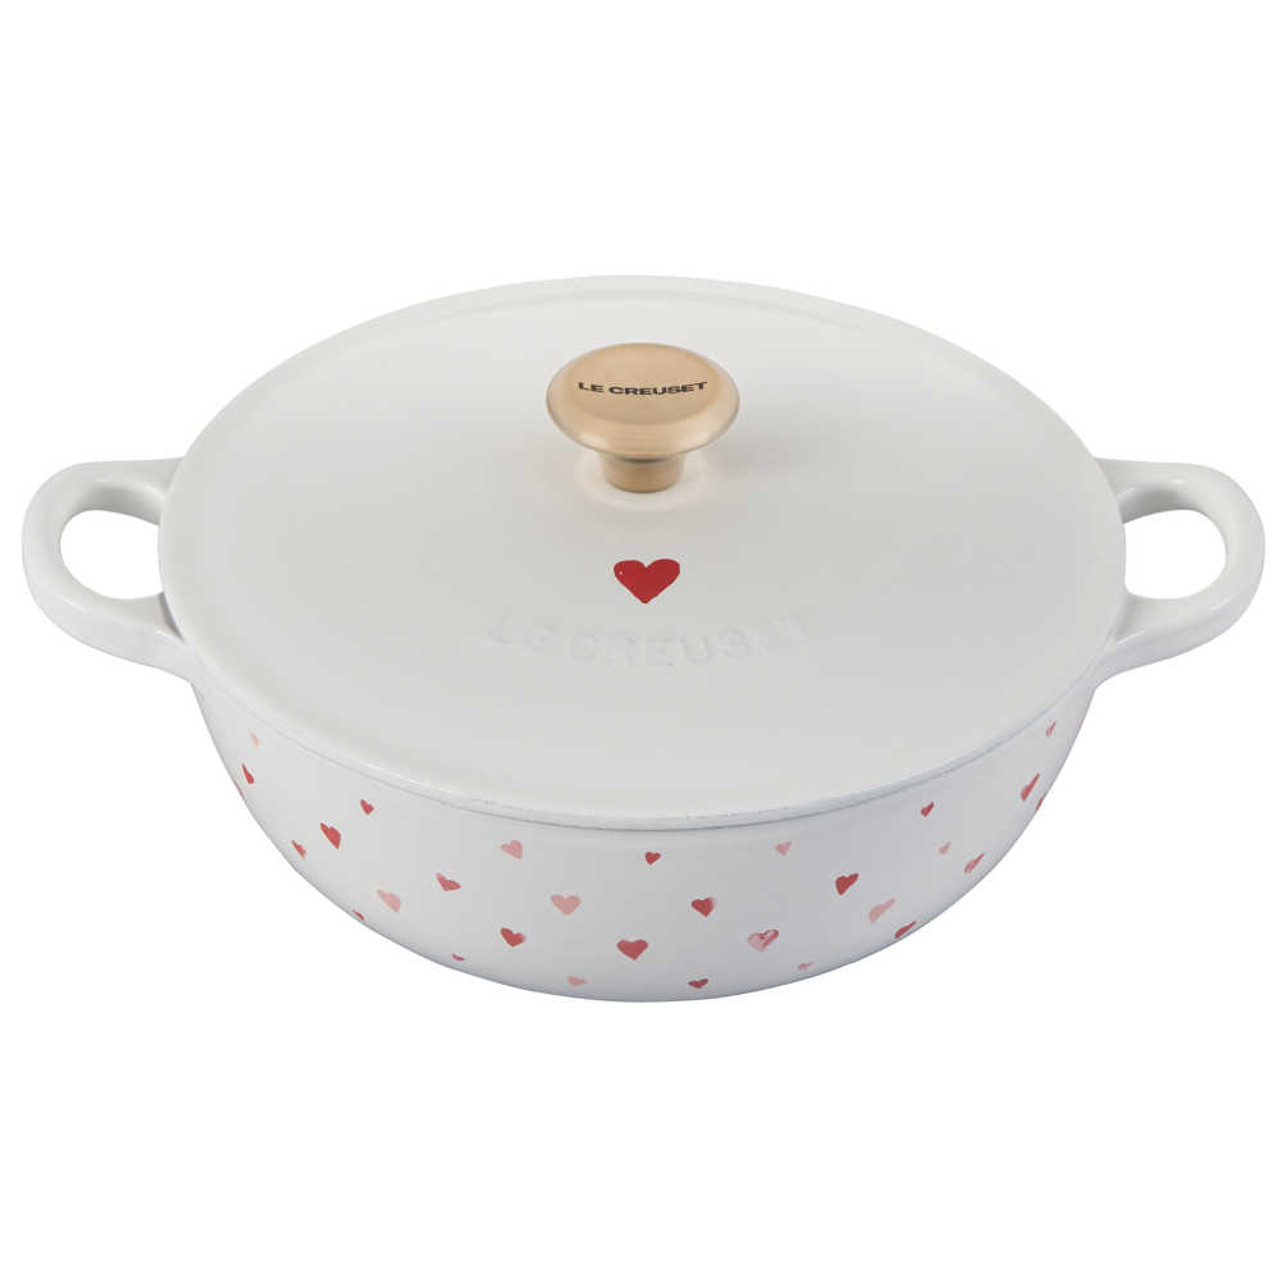 https://cdn11.bigcommerce.com/s-hccytny0od/images/stencil/1280x1280/products/4461/17497/Le_Creuset_LAmour_Collection_Soup_Pot_2__69770.1639451691.jpg?c=2?imbypass=on